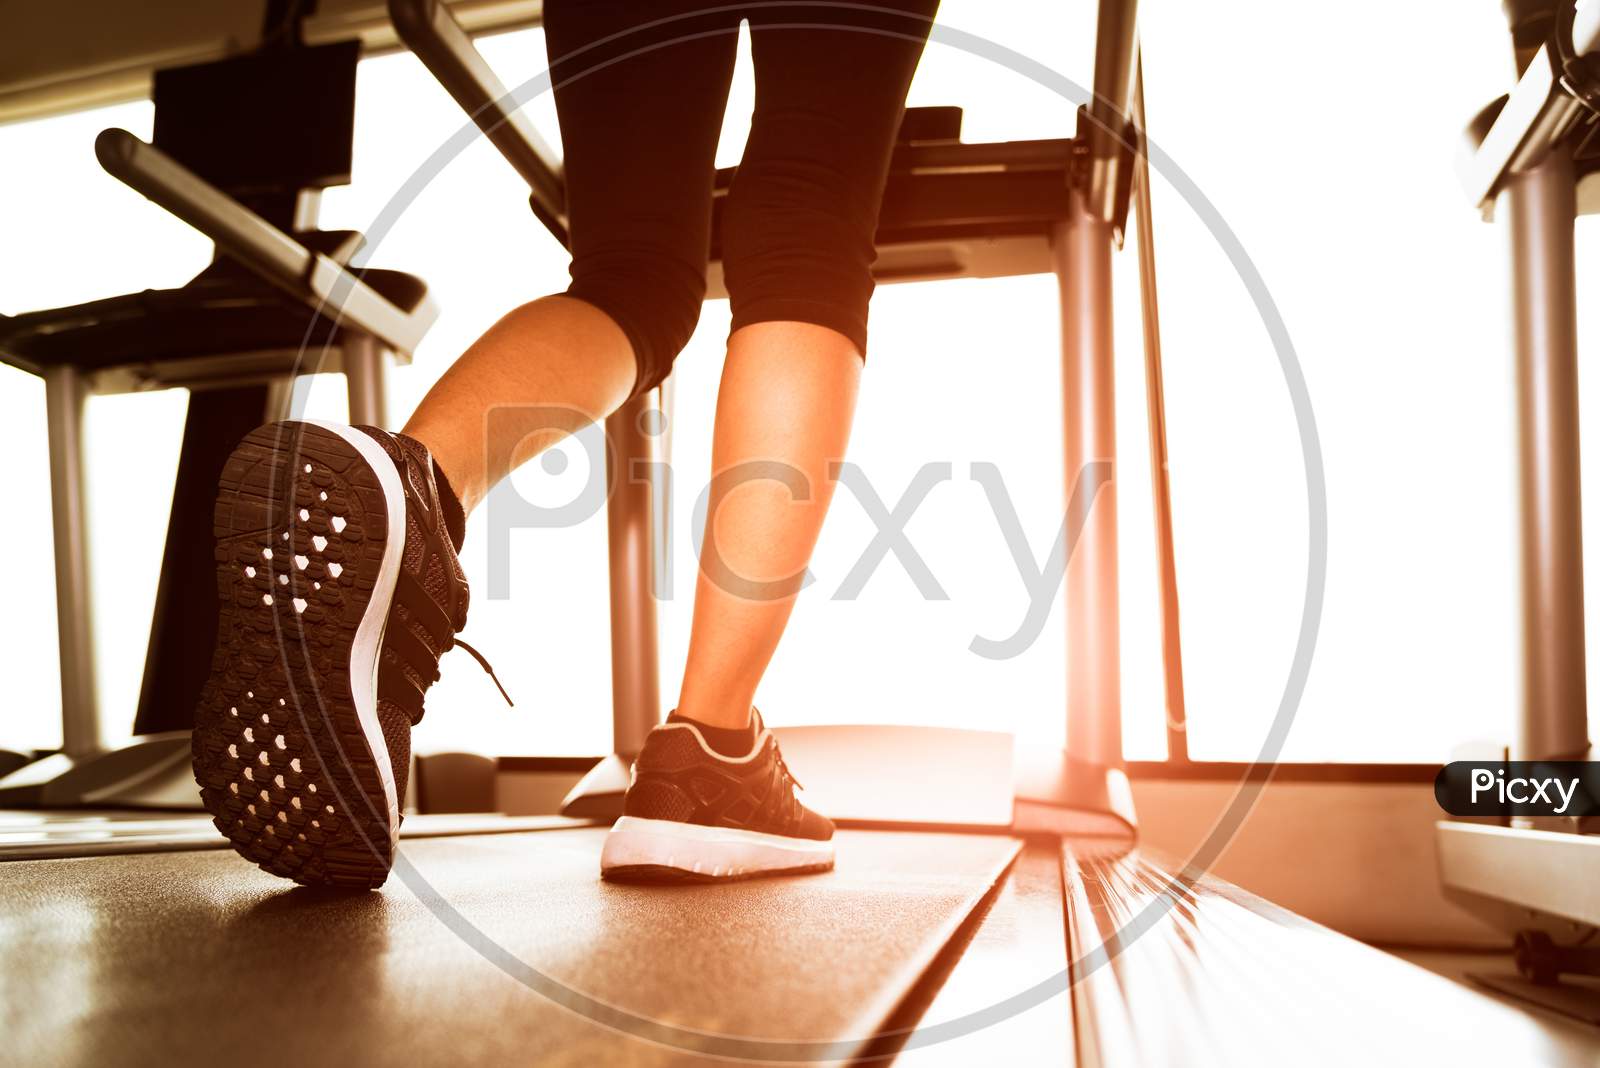 Back View Of Lower Body Legs Of Fitness Girl Running On Machine Or Treadmill In Fitness Gym With Sun Ray. Warm Tone. Healthy And Exercise Activity Concept. Workout And  Strength Training Theme.